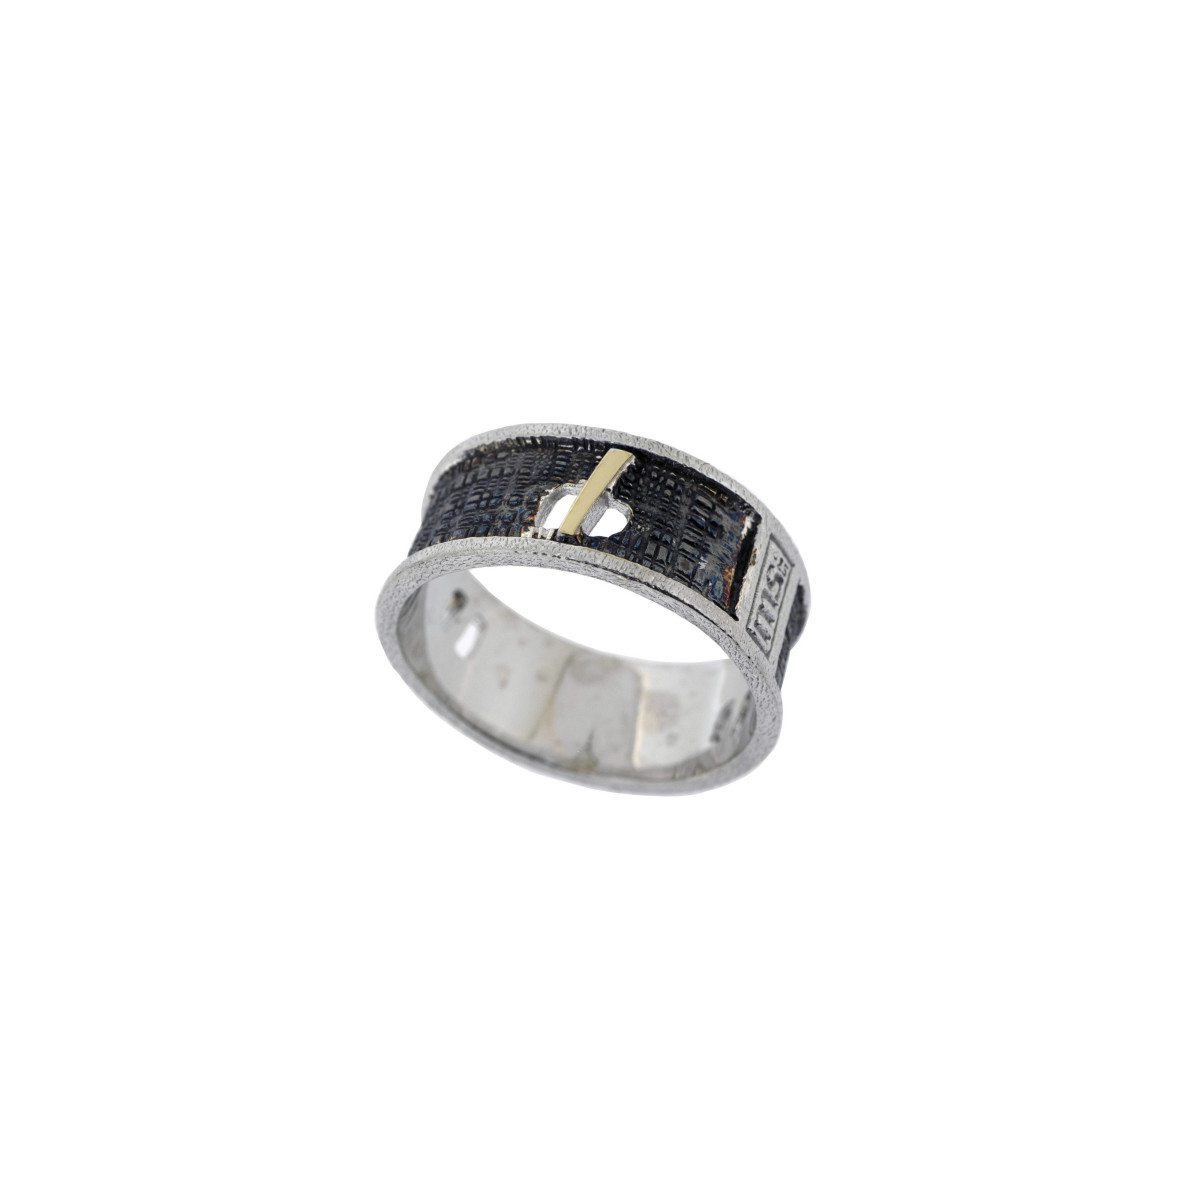 Silver and gold ring